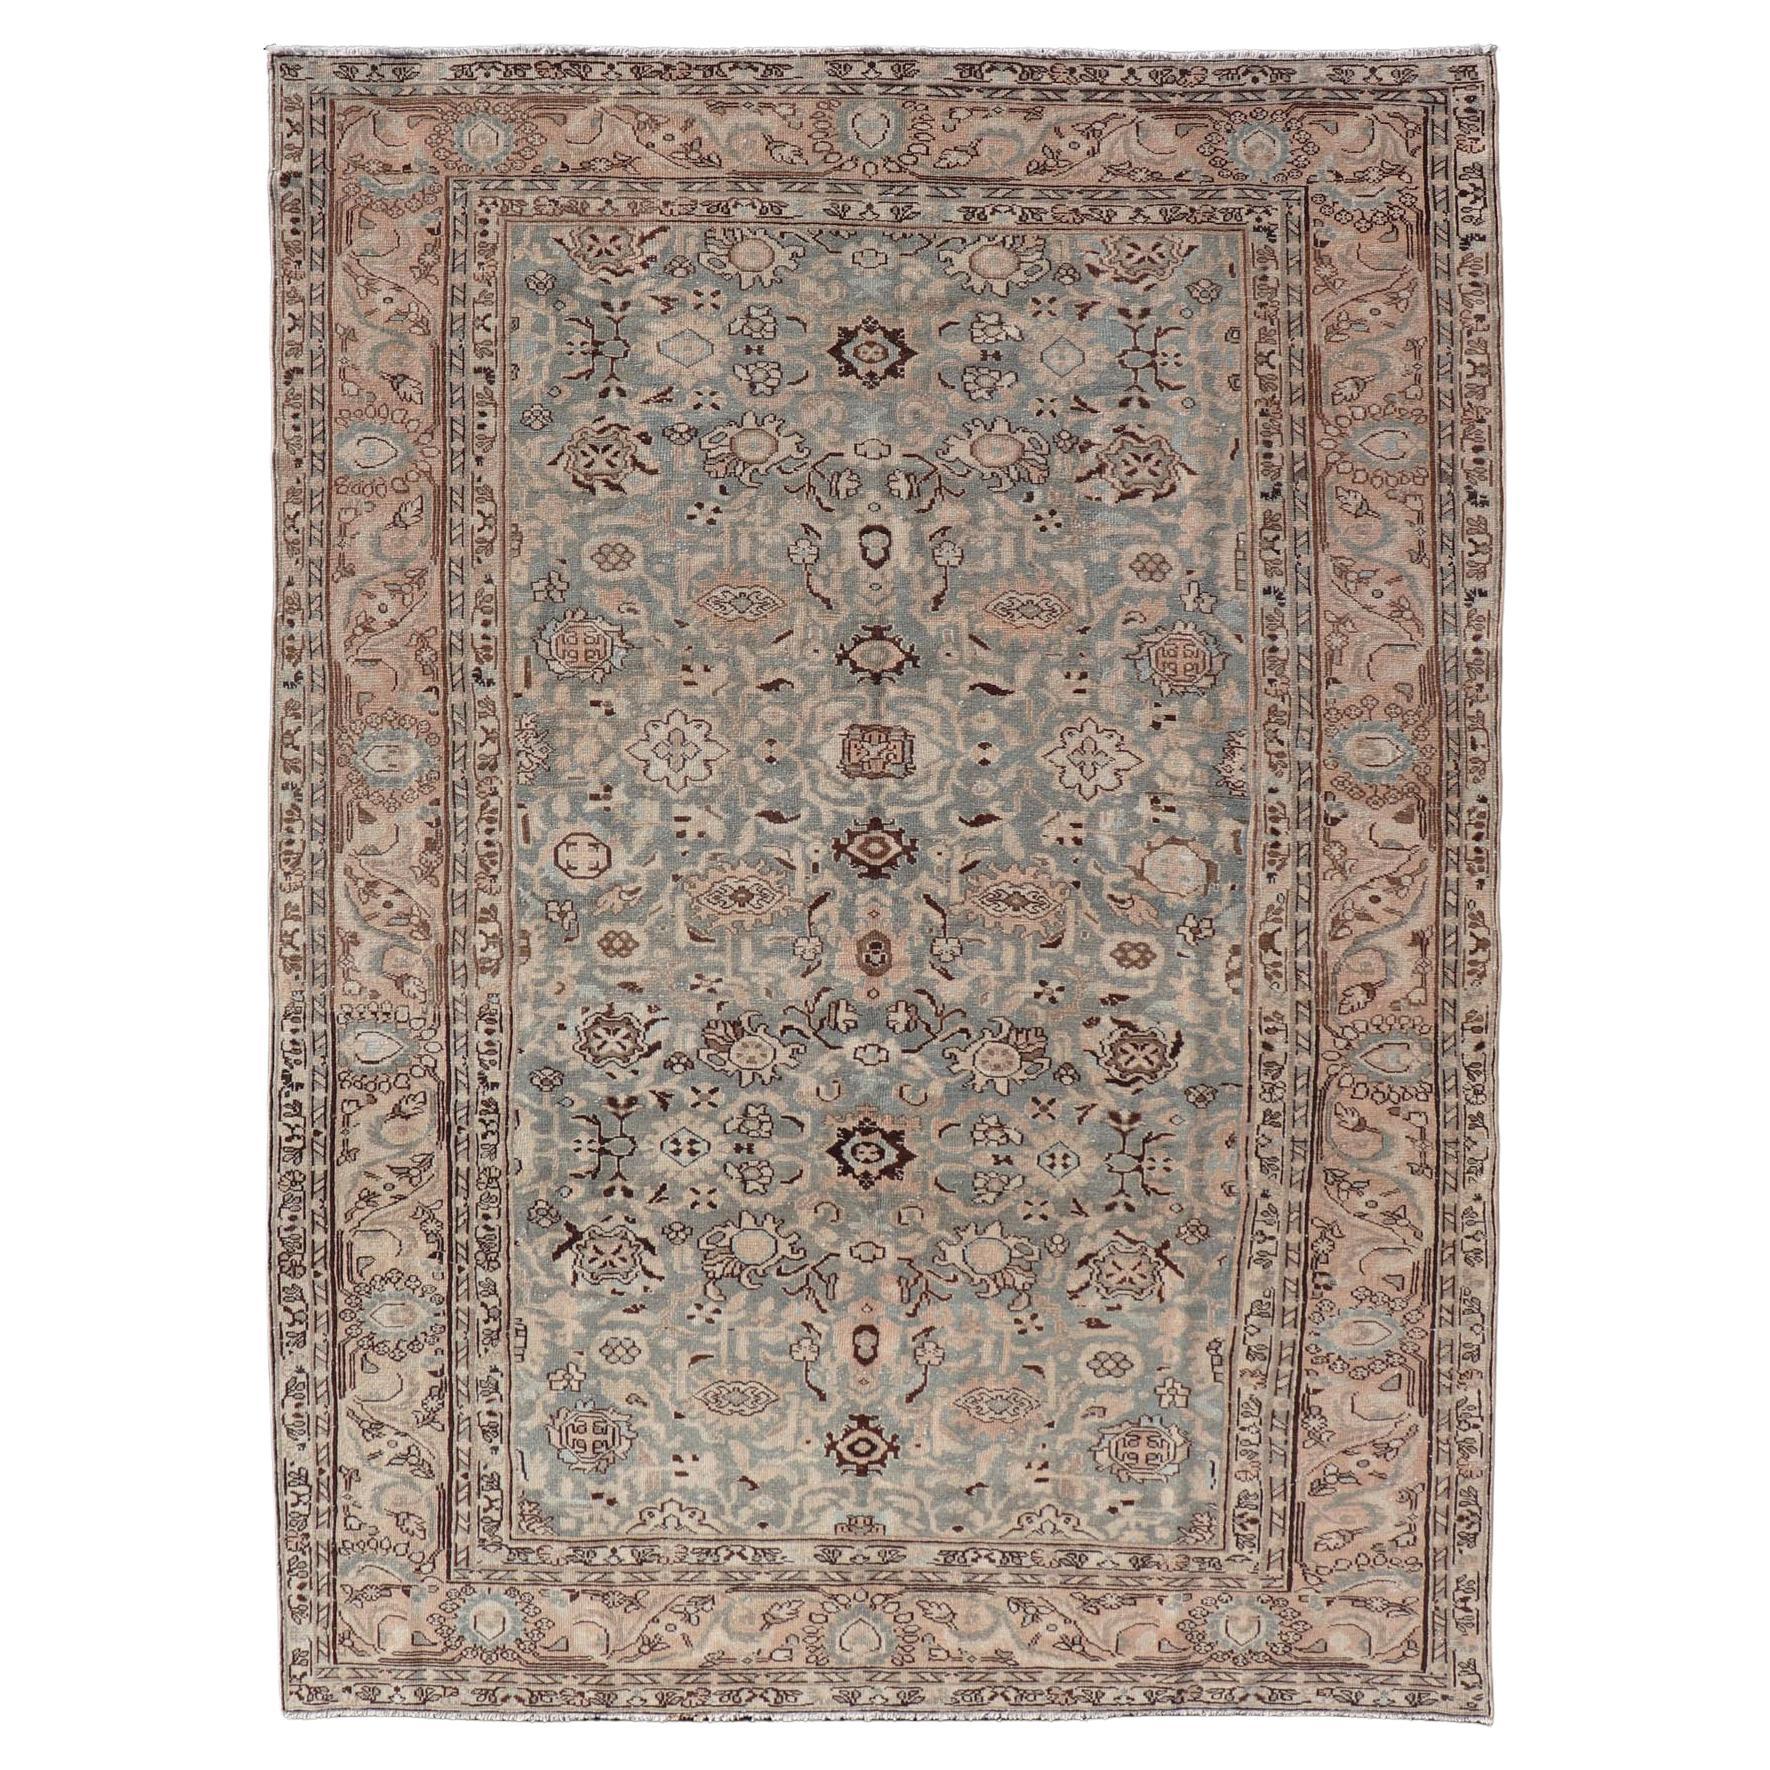 All-Over Floral Antique Persian Hamadan Rug in Gray Green, Peach & Earth Tones